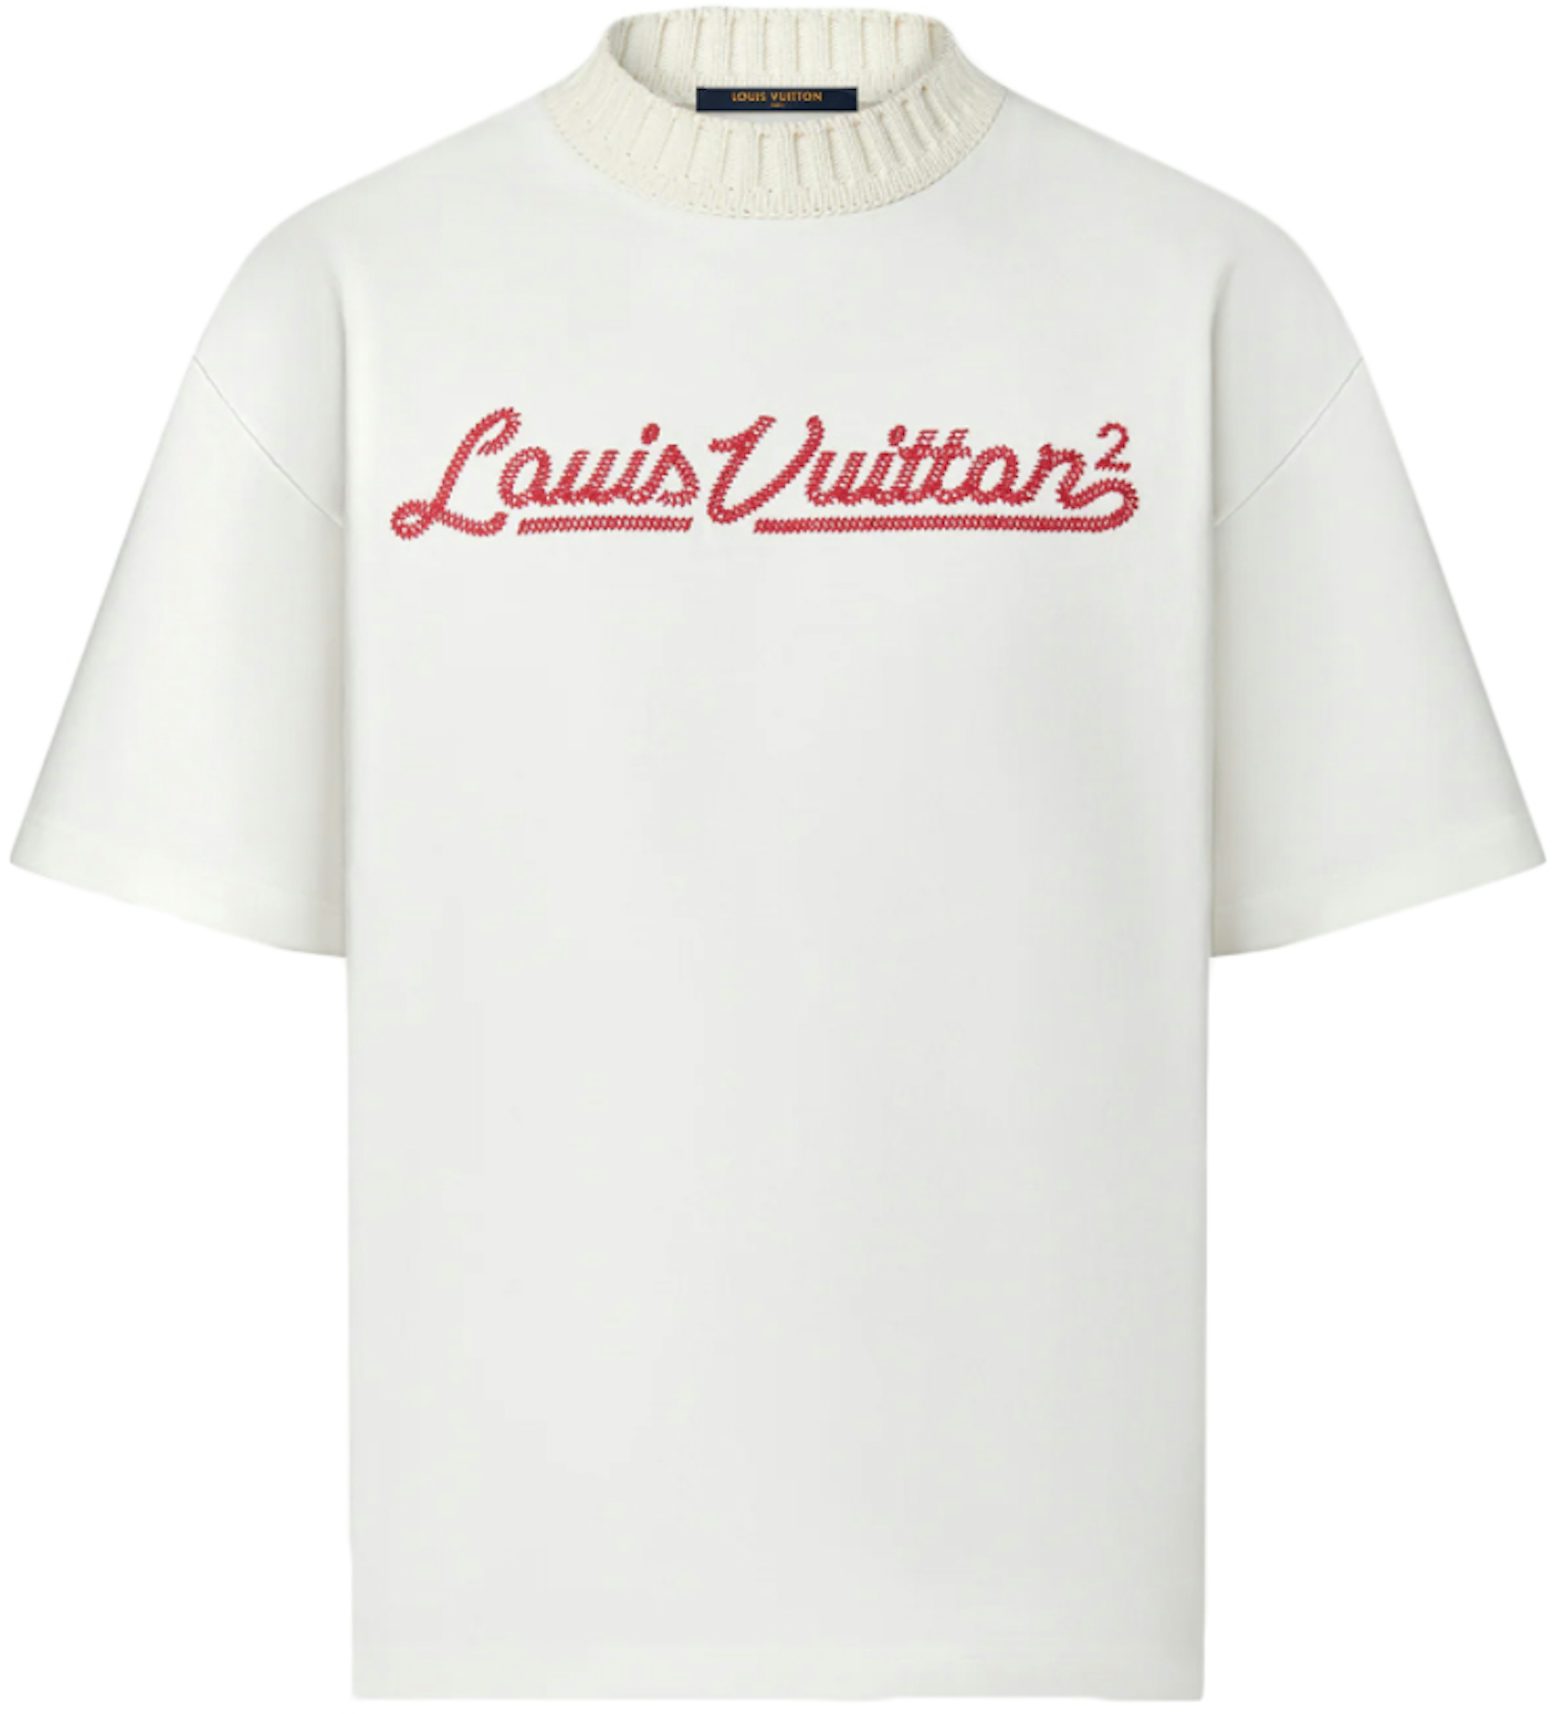 AUTH Louis Vuitton Signature LV Knit Tee Blue White Red Shirt white Size M